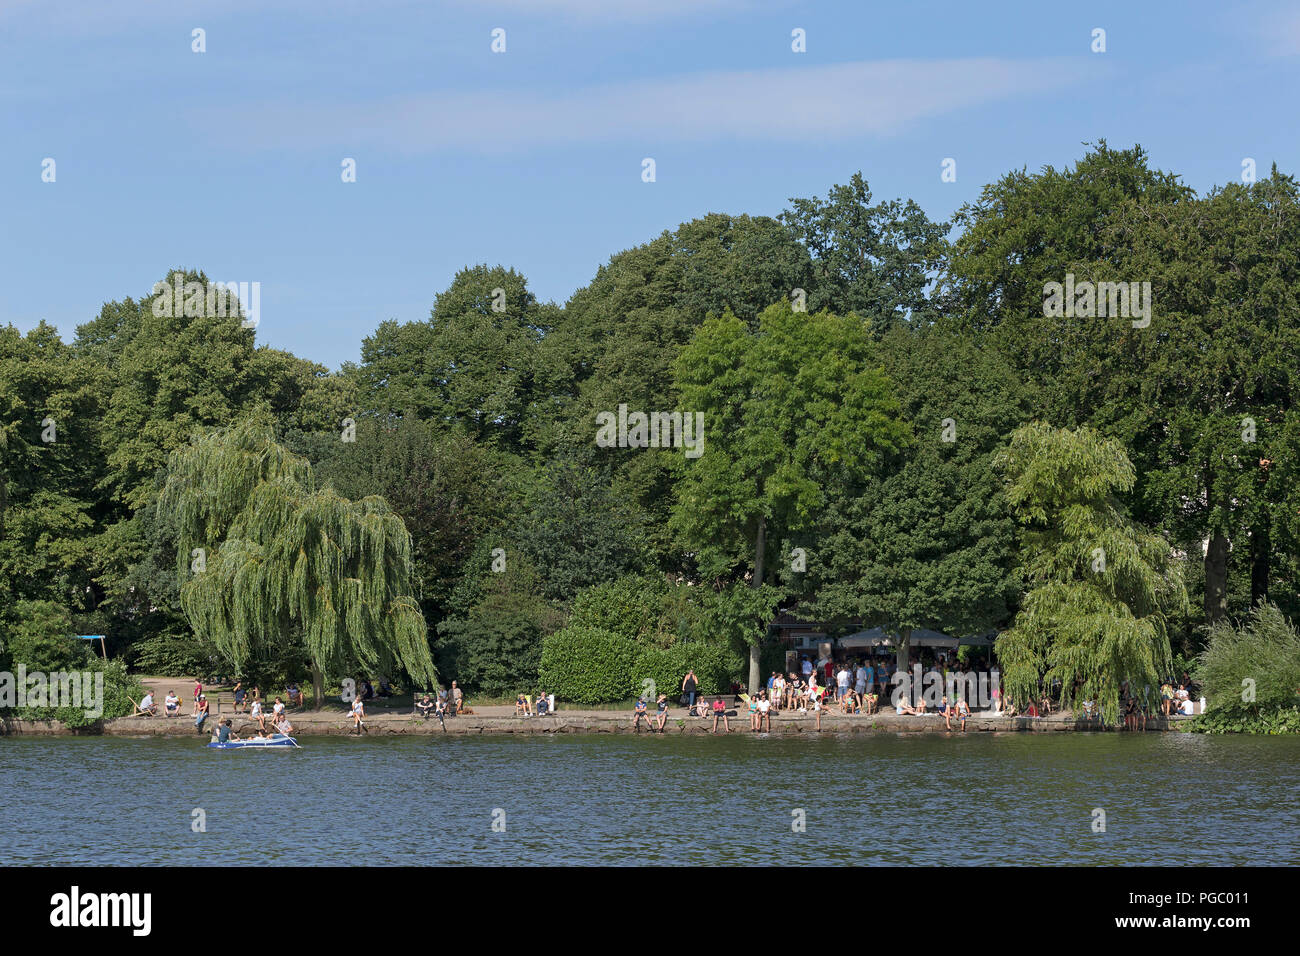 lake Außenalster (Outer Alster), Hamburg, Germany Stock Photo